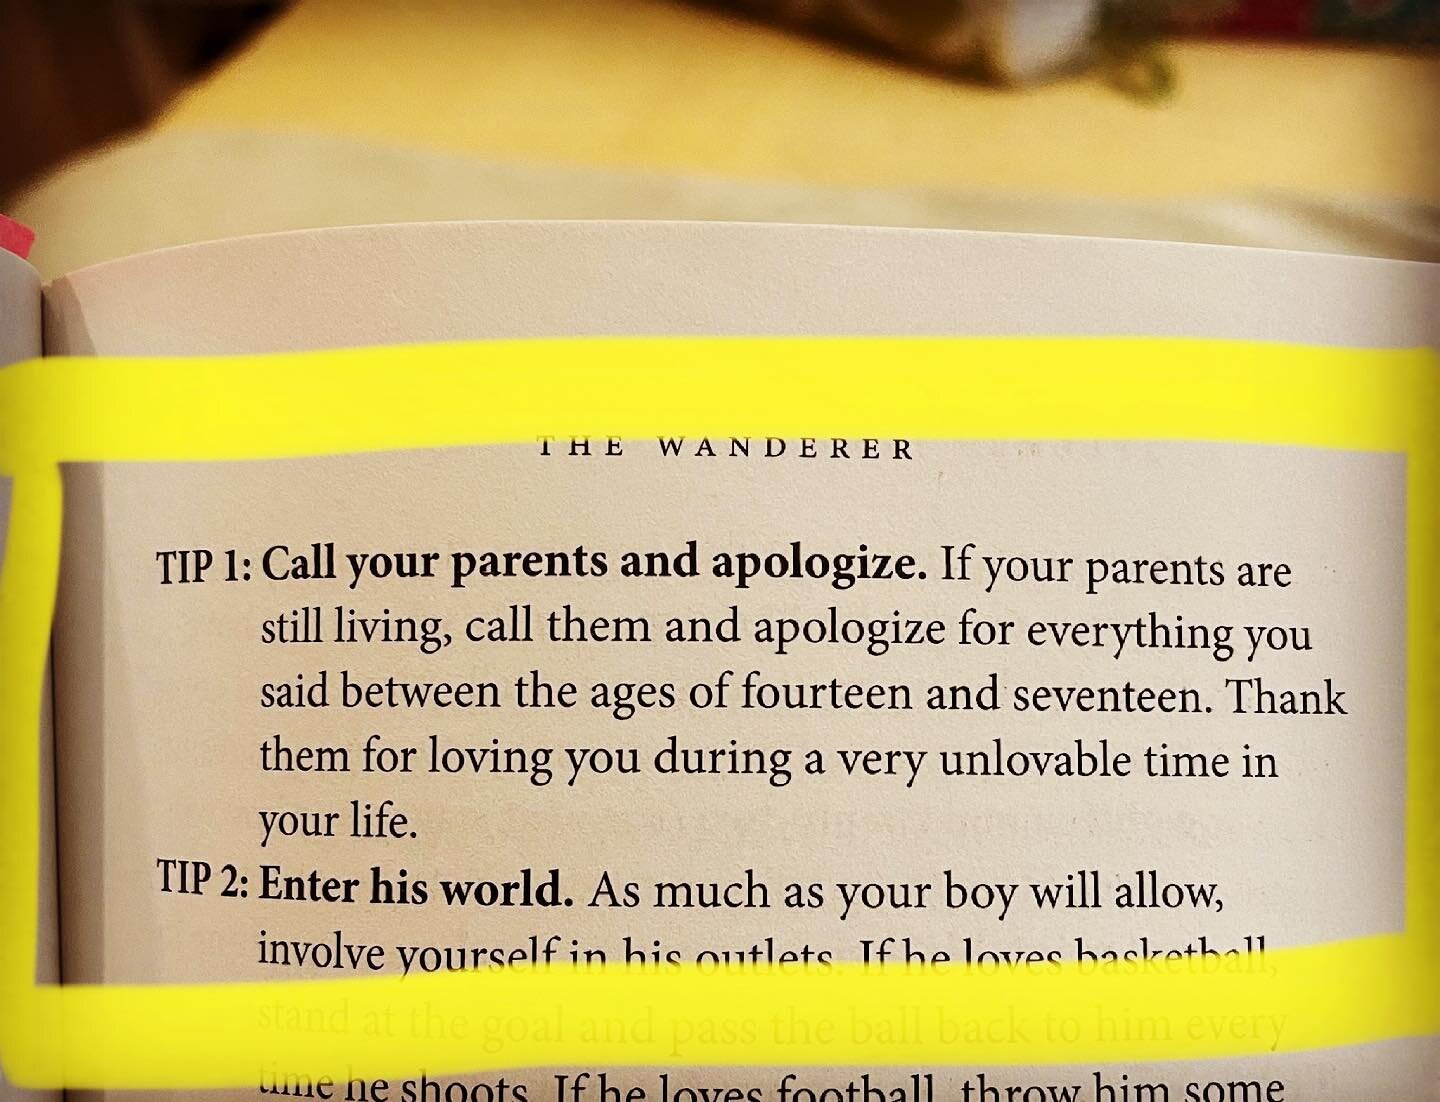 With my sincere apologies to my parents 😳 Thanks for loving me when I was a teenager! &hellip; Discovered while reading the parenting book #wildthingstheartofnurturingboys. #parentingtips #twinlife